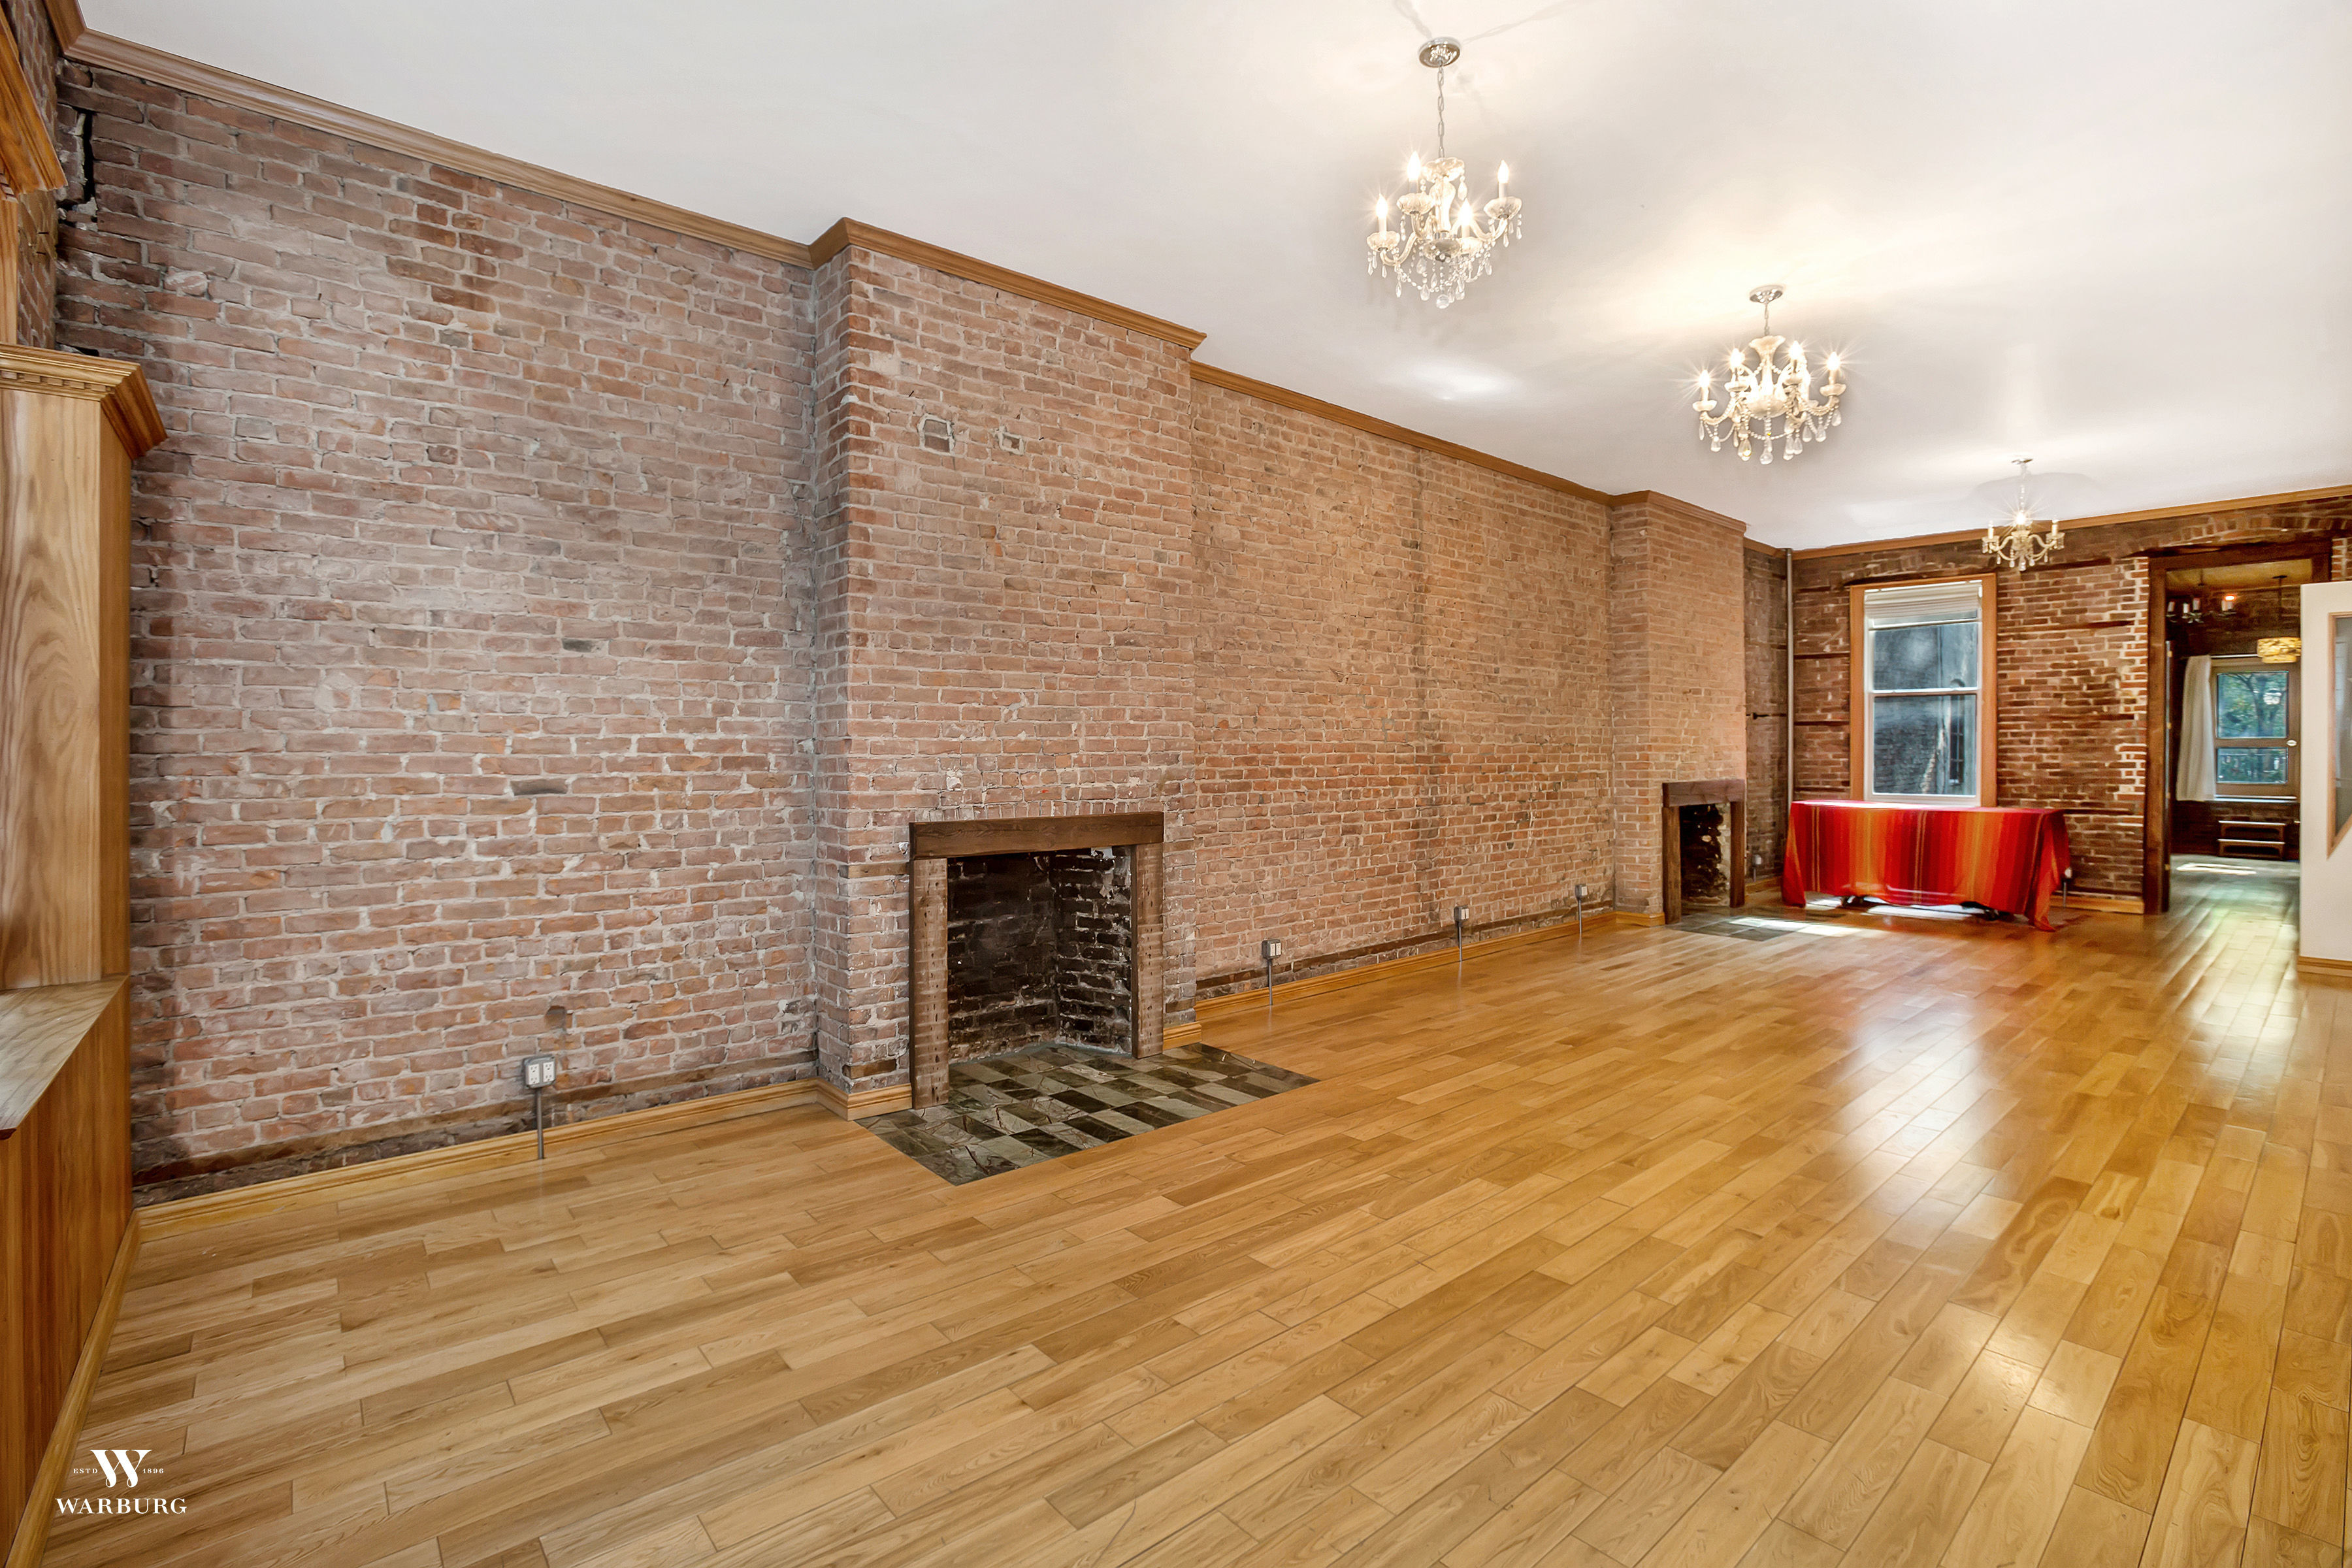 11 Lovely Hardwood Floor Installation Cost Nyc 2024 free download hardwood floor installation cost nyc of 113 east 2nd street apt th east village ny 10009 wr 232763 within 113 east 2nd street apt th photo 10 wr 232763